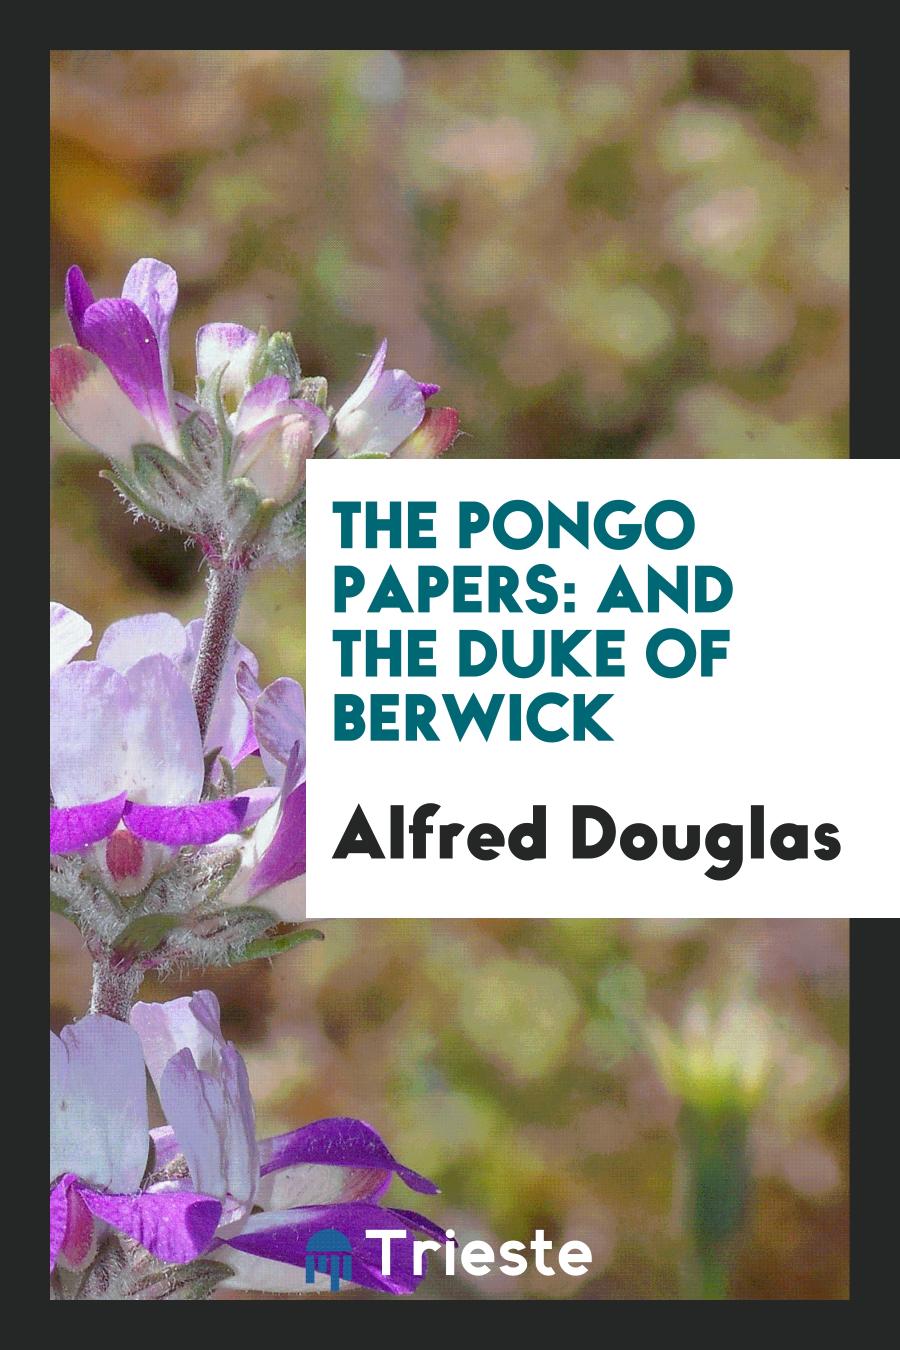 The Pongo Papers: And the Duke of Berwick